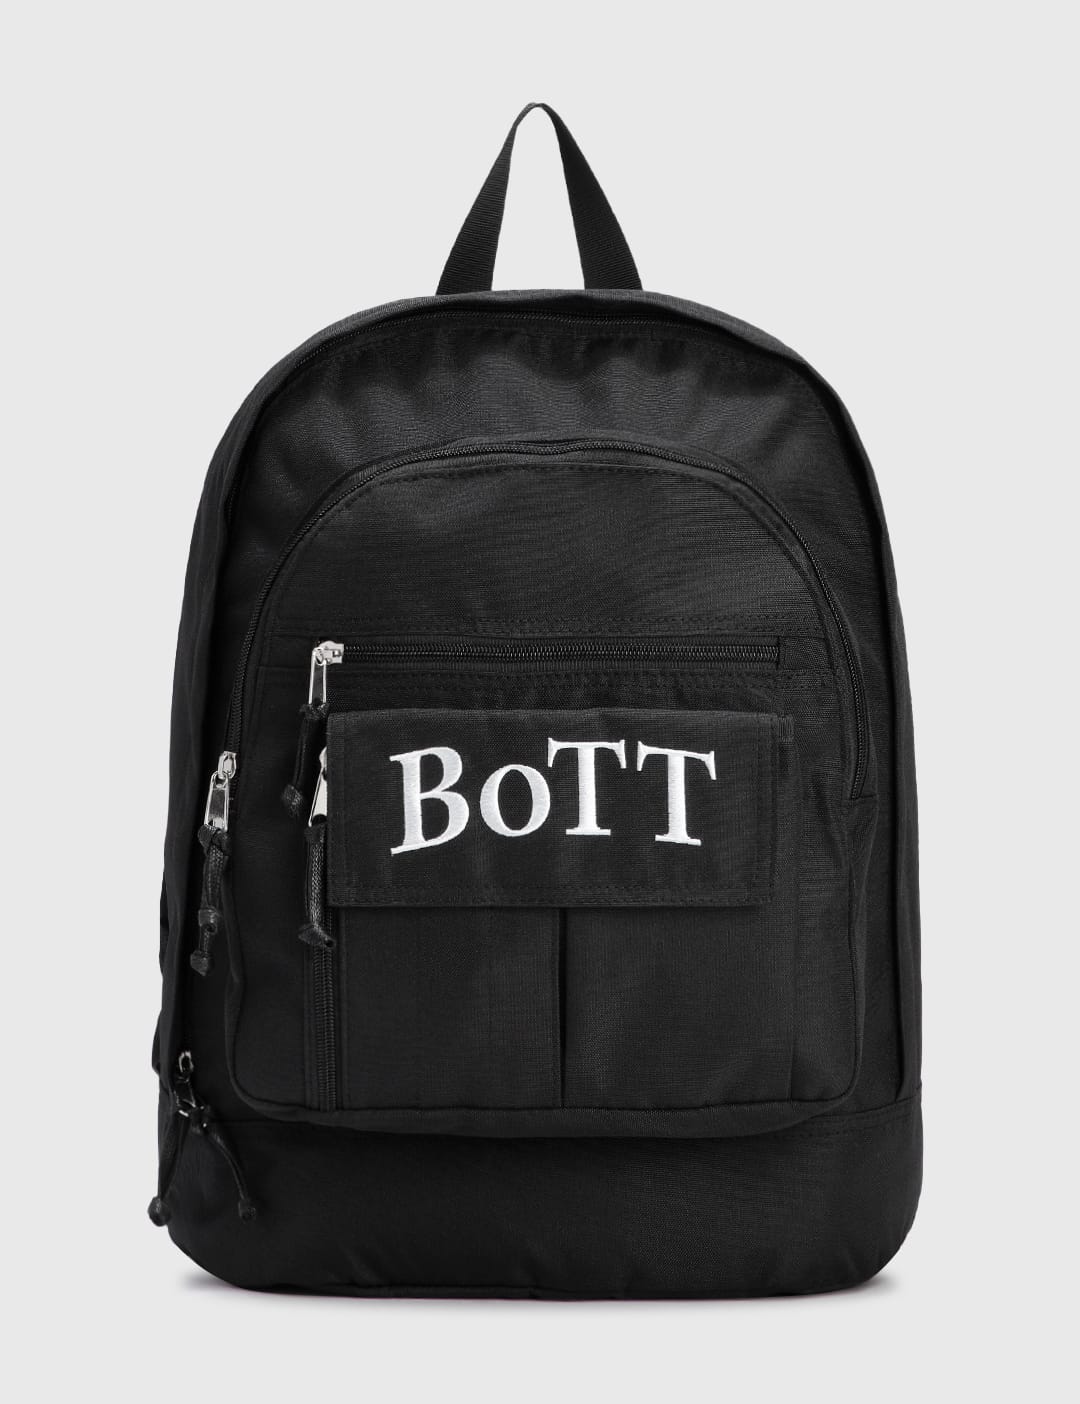 BoTT - School Backpack | HBX - Globally Curated Fashion and